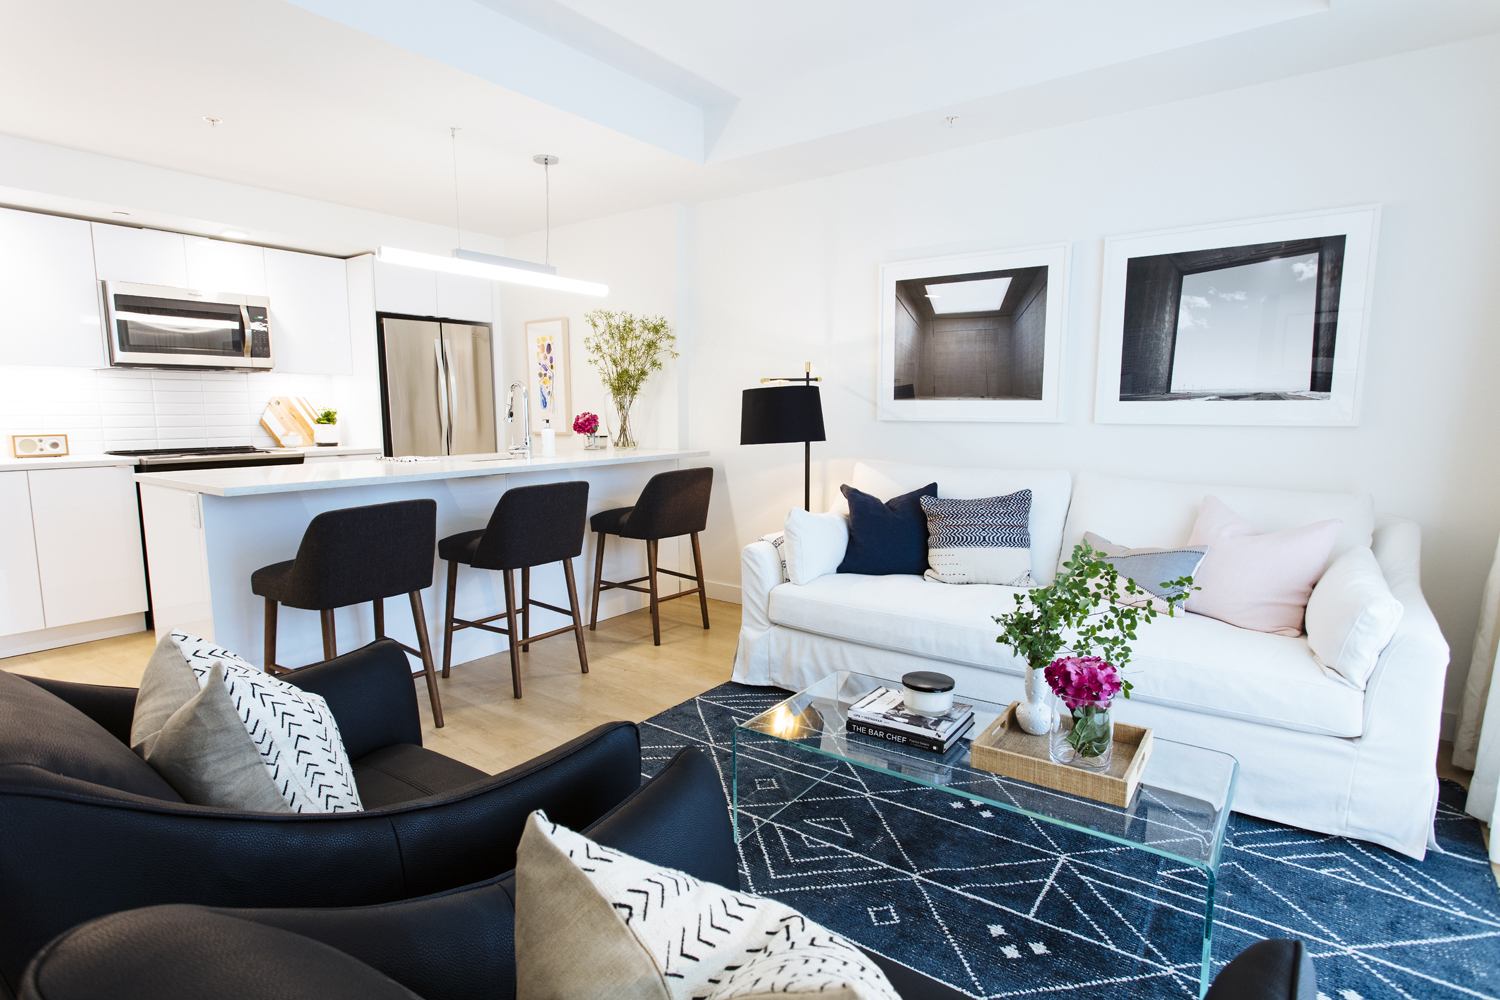 An open-concept living room and kitchen space with white and black furniture with a patterned blue rug